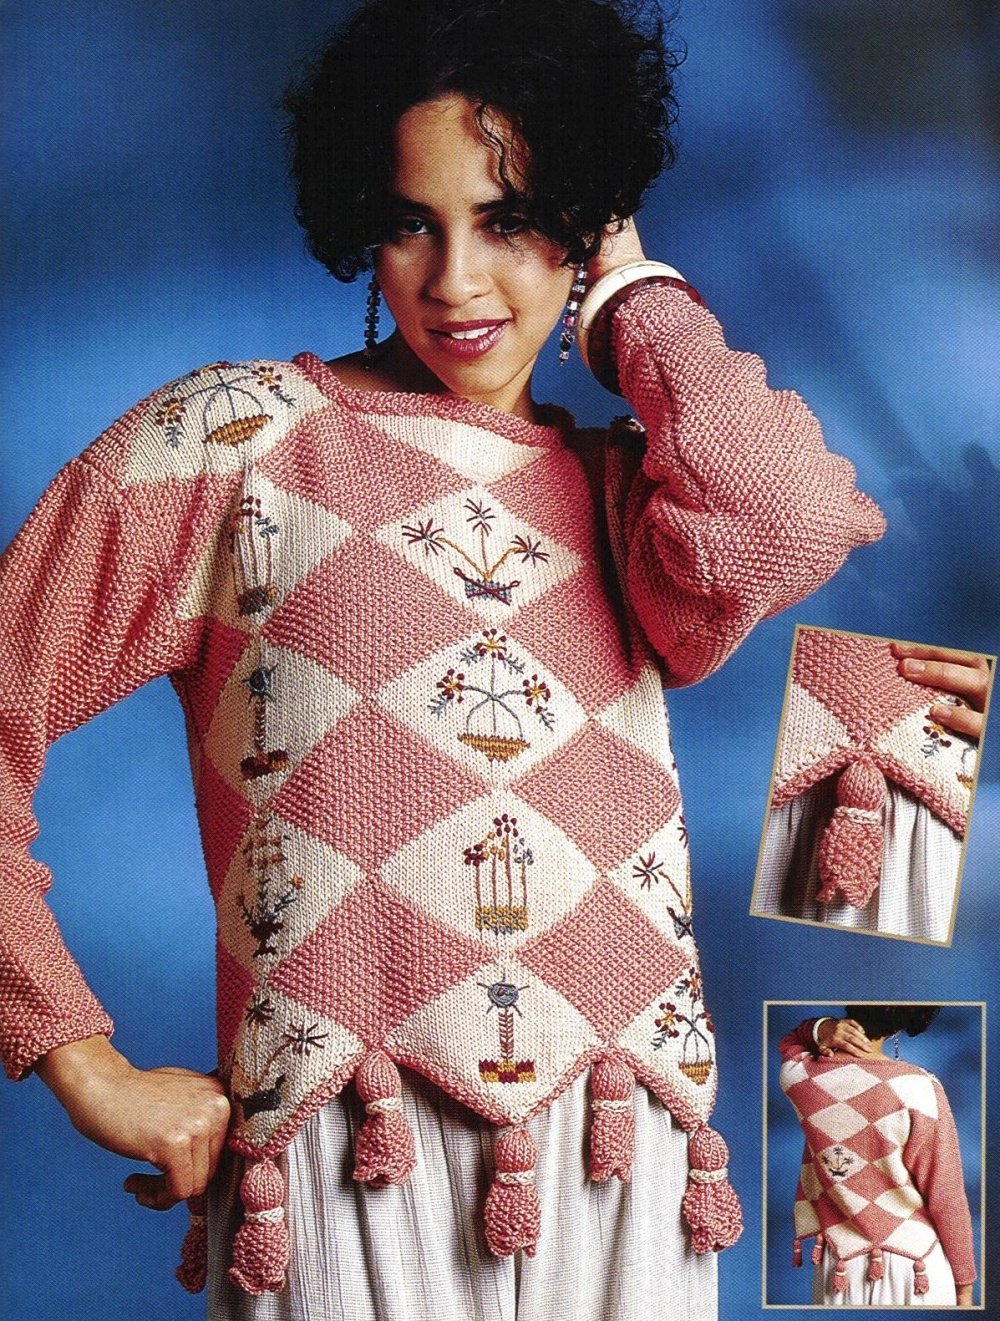 Interweave Knits Spring 1999 Applique Embroidery Crochet